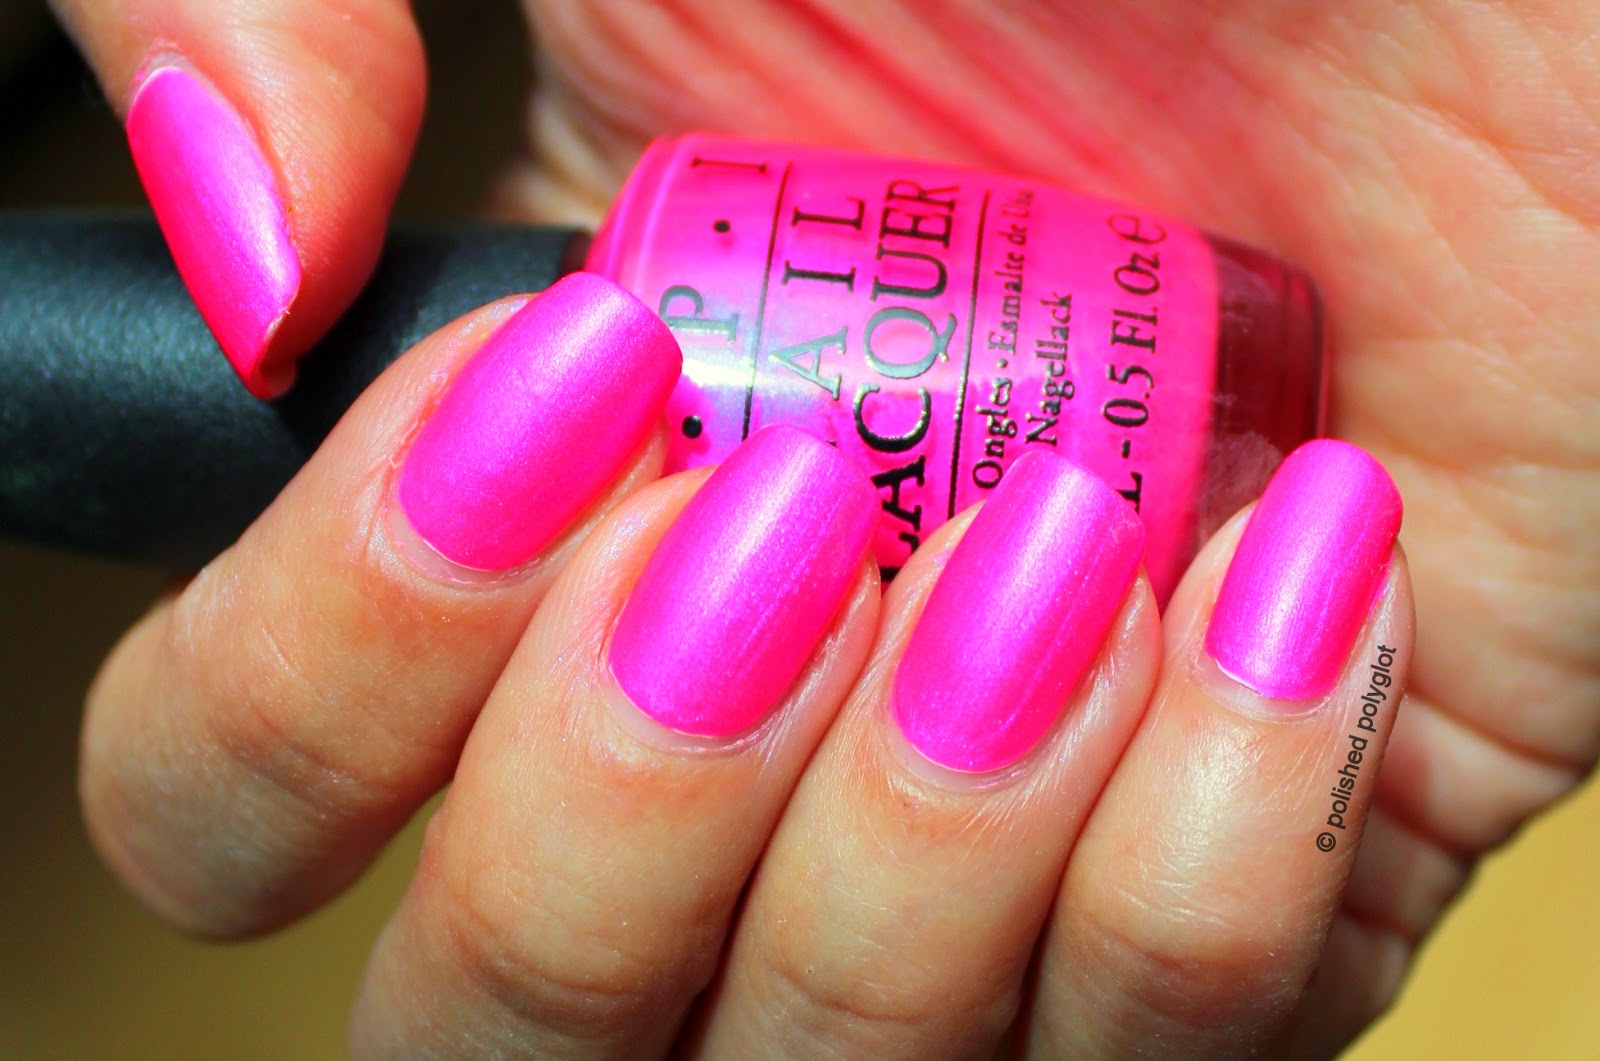 1. OPI Nail Lacquer in "Hotter Than You Pink" - wide 5